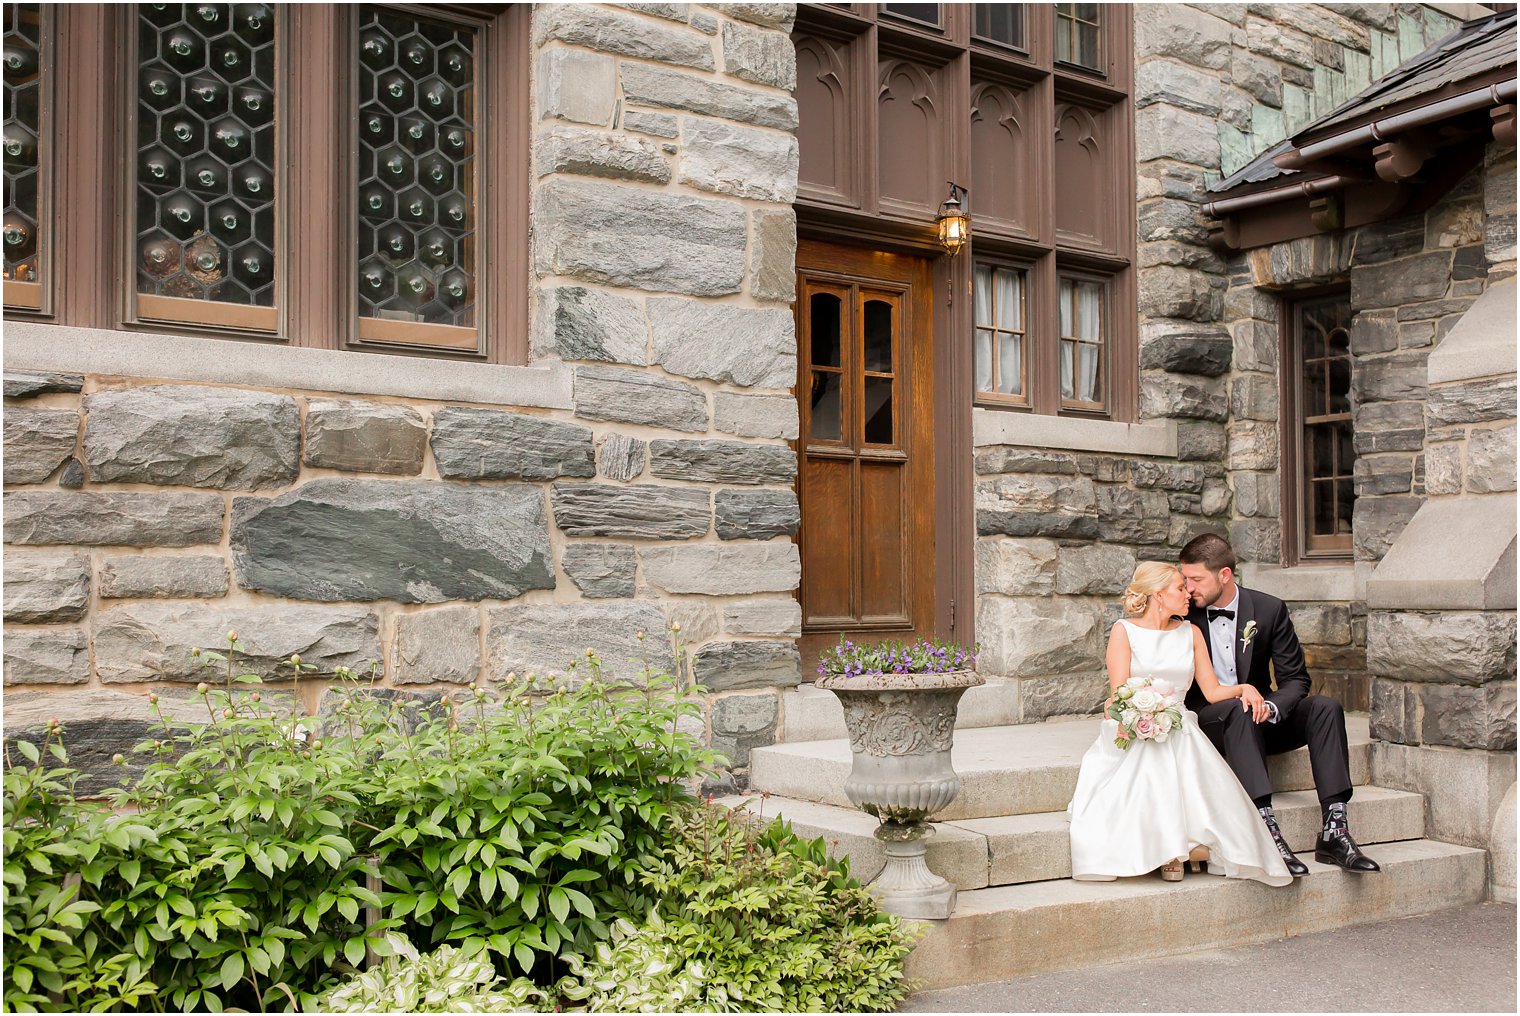 Bride and groom photo | Castle Hill Inn Resort in Ludlow, Vermont